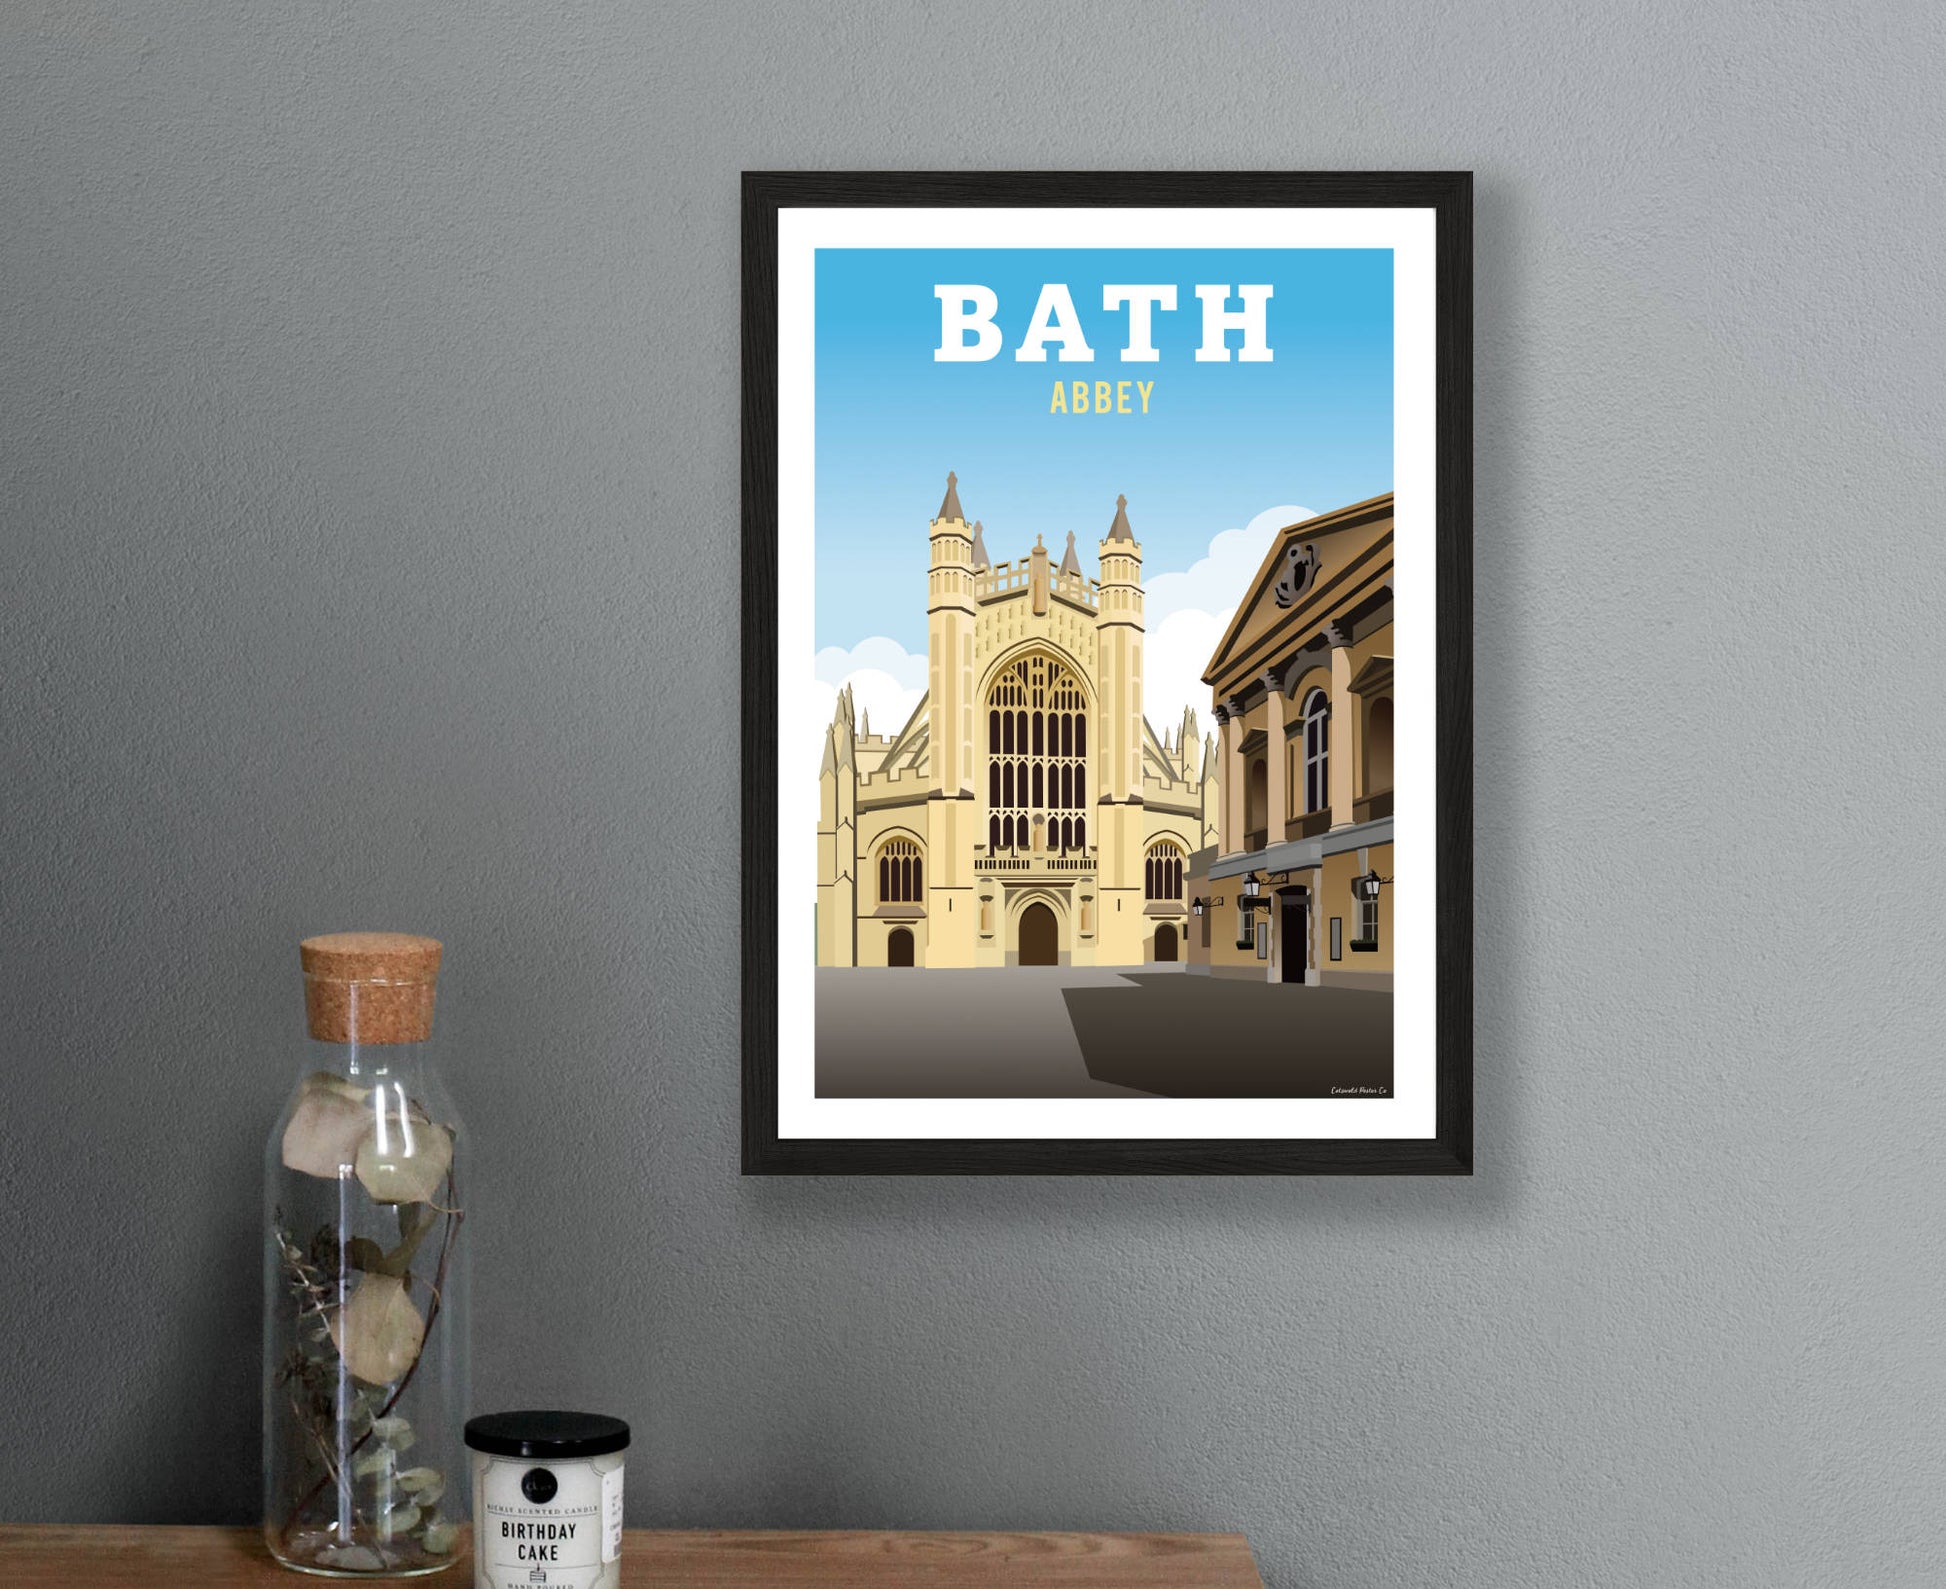 Bath Abbey Poster in frame on wall